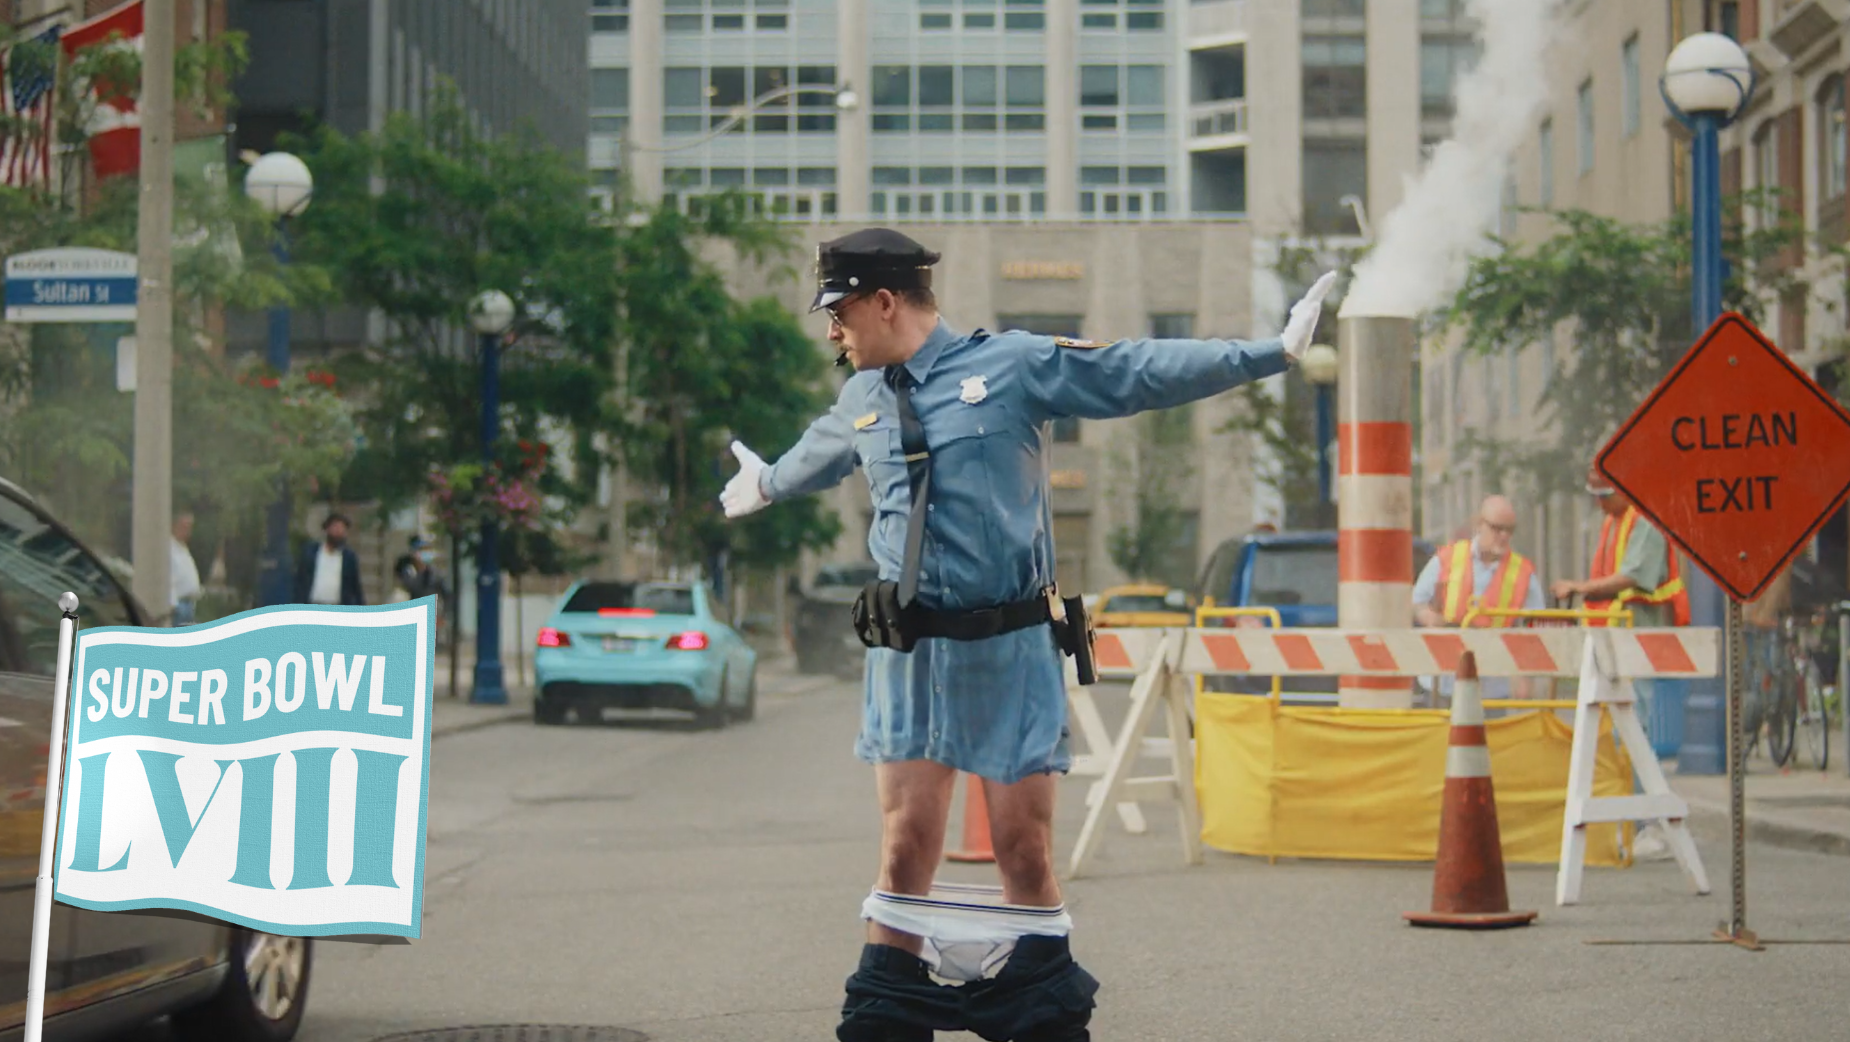 DUDE Wipes Drops Its Pants in Super Bowl Focused Campaign